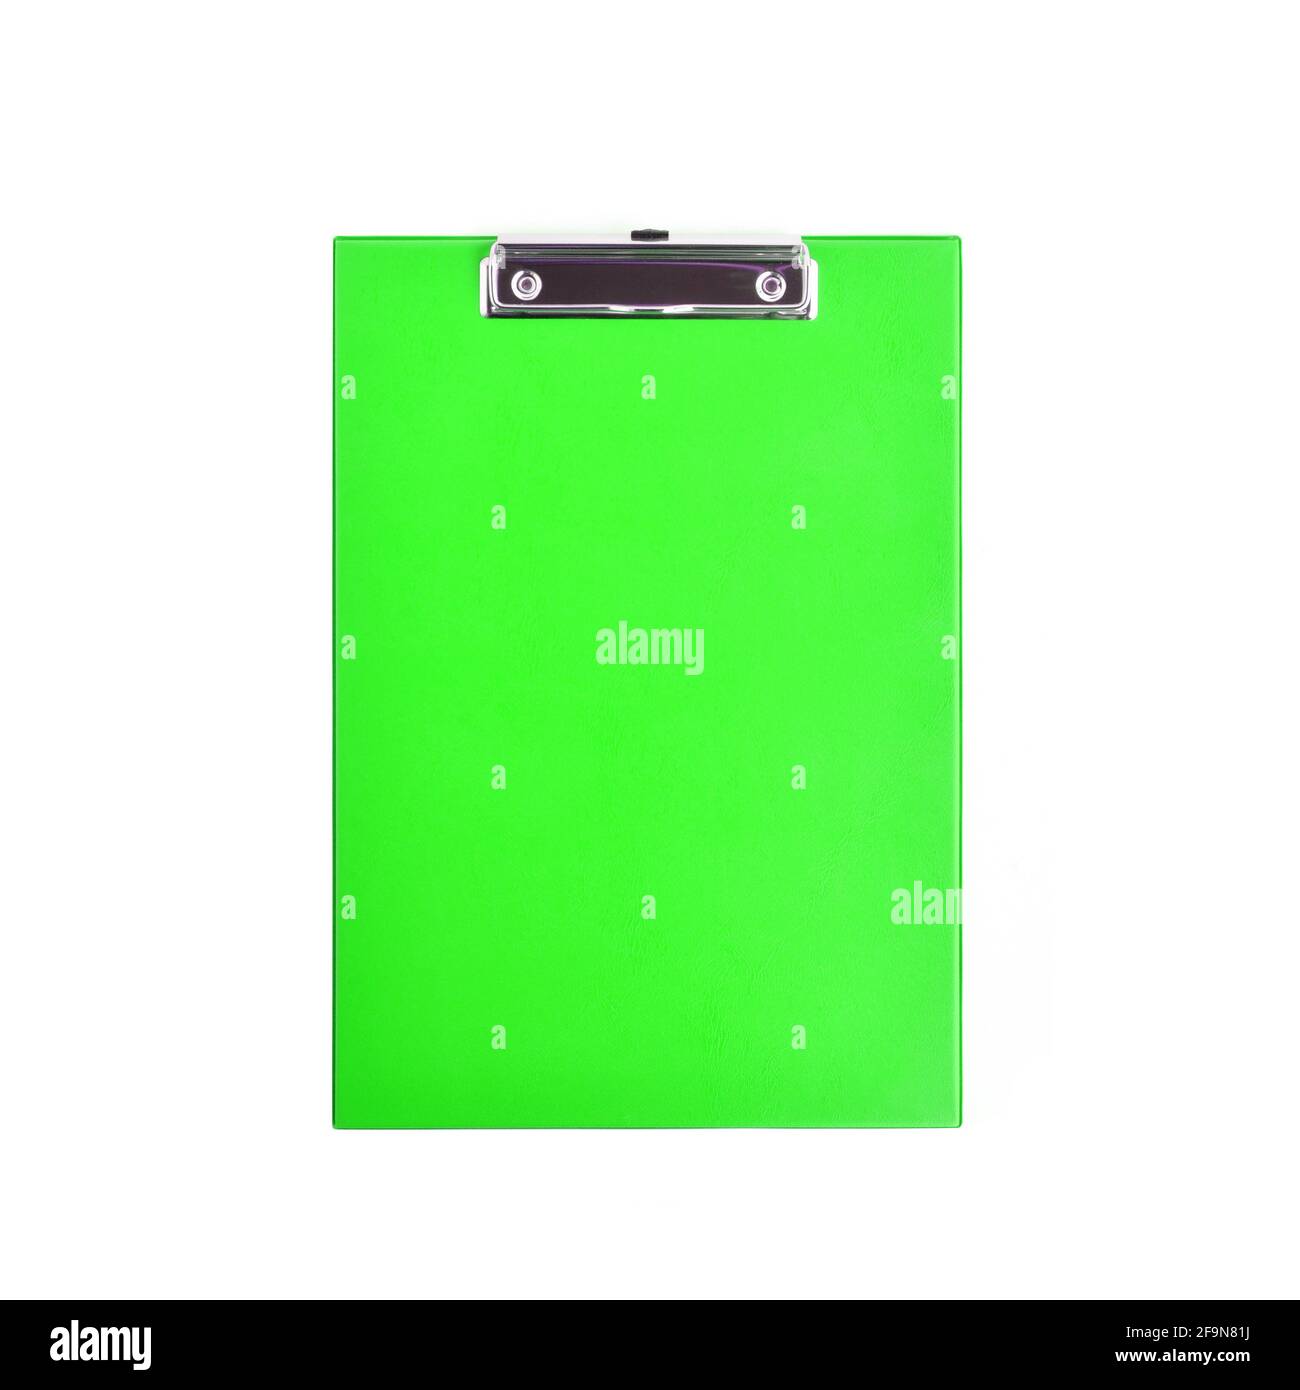 Clipboard - colorful plastic clipboard or writing board isolated on white background Stock Photo